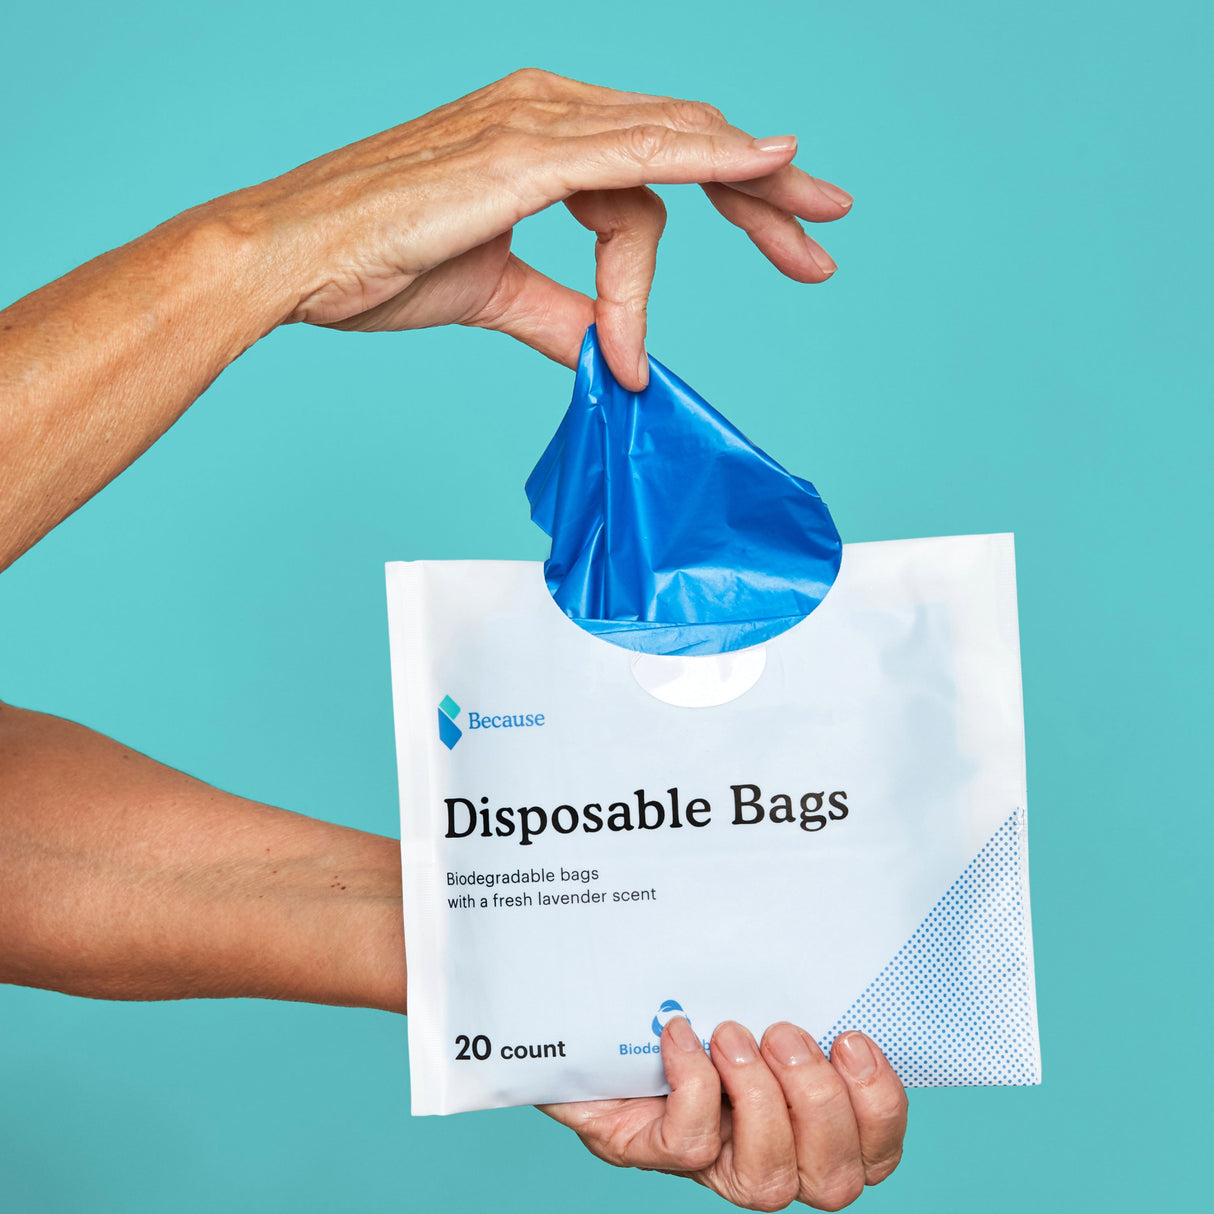 A woman dispensing the biodegradable bags from the package